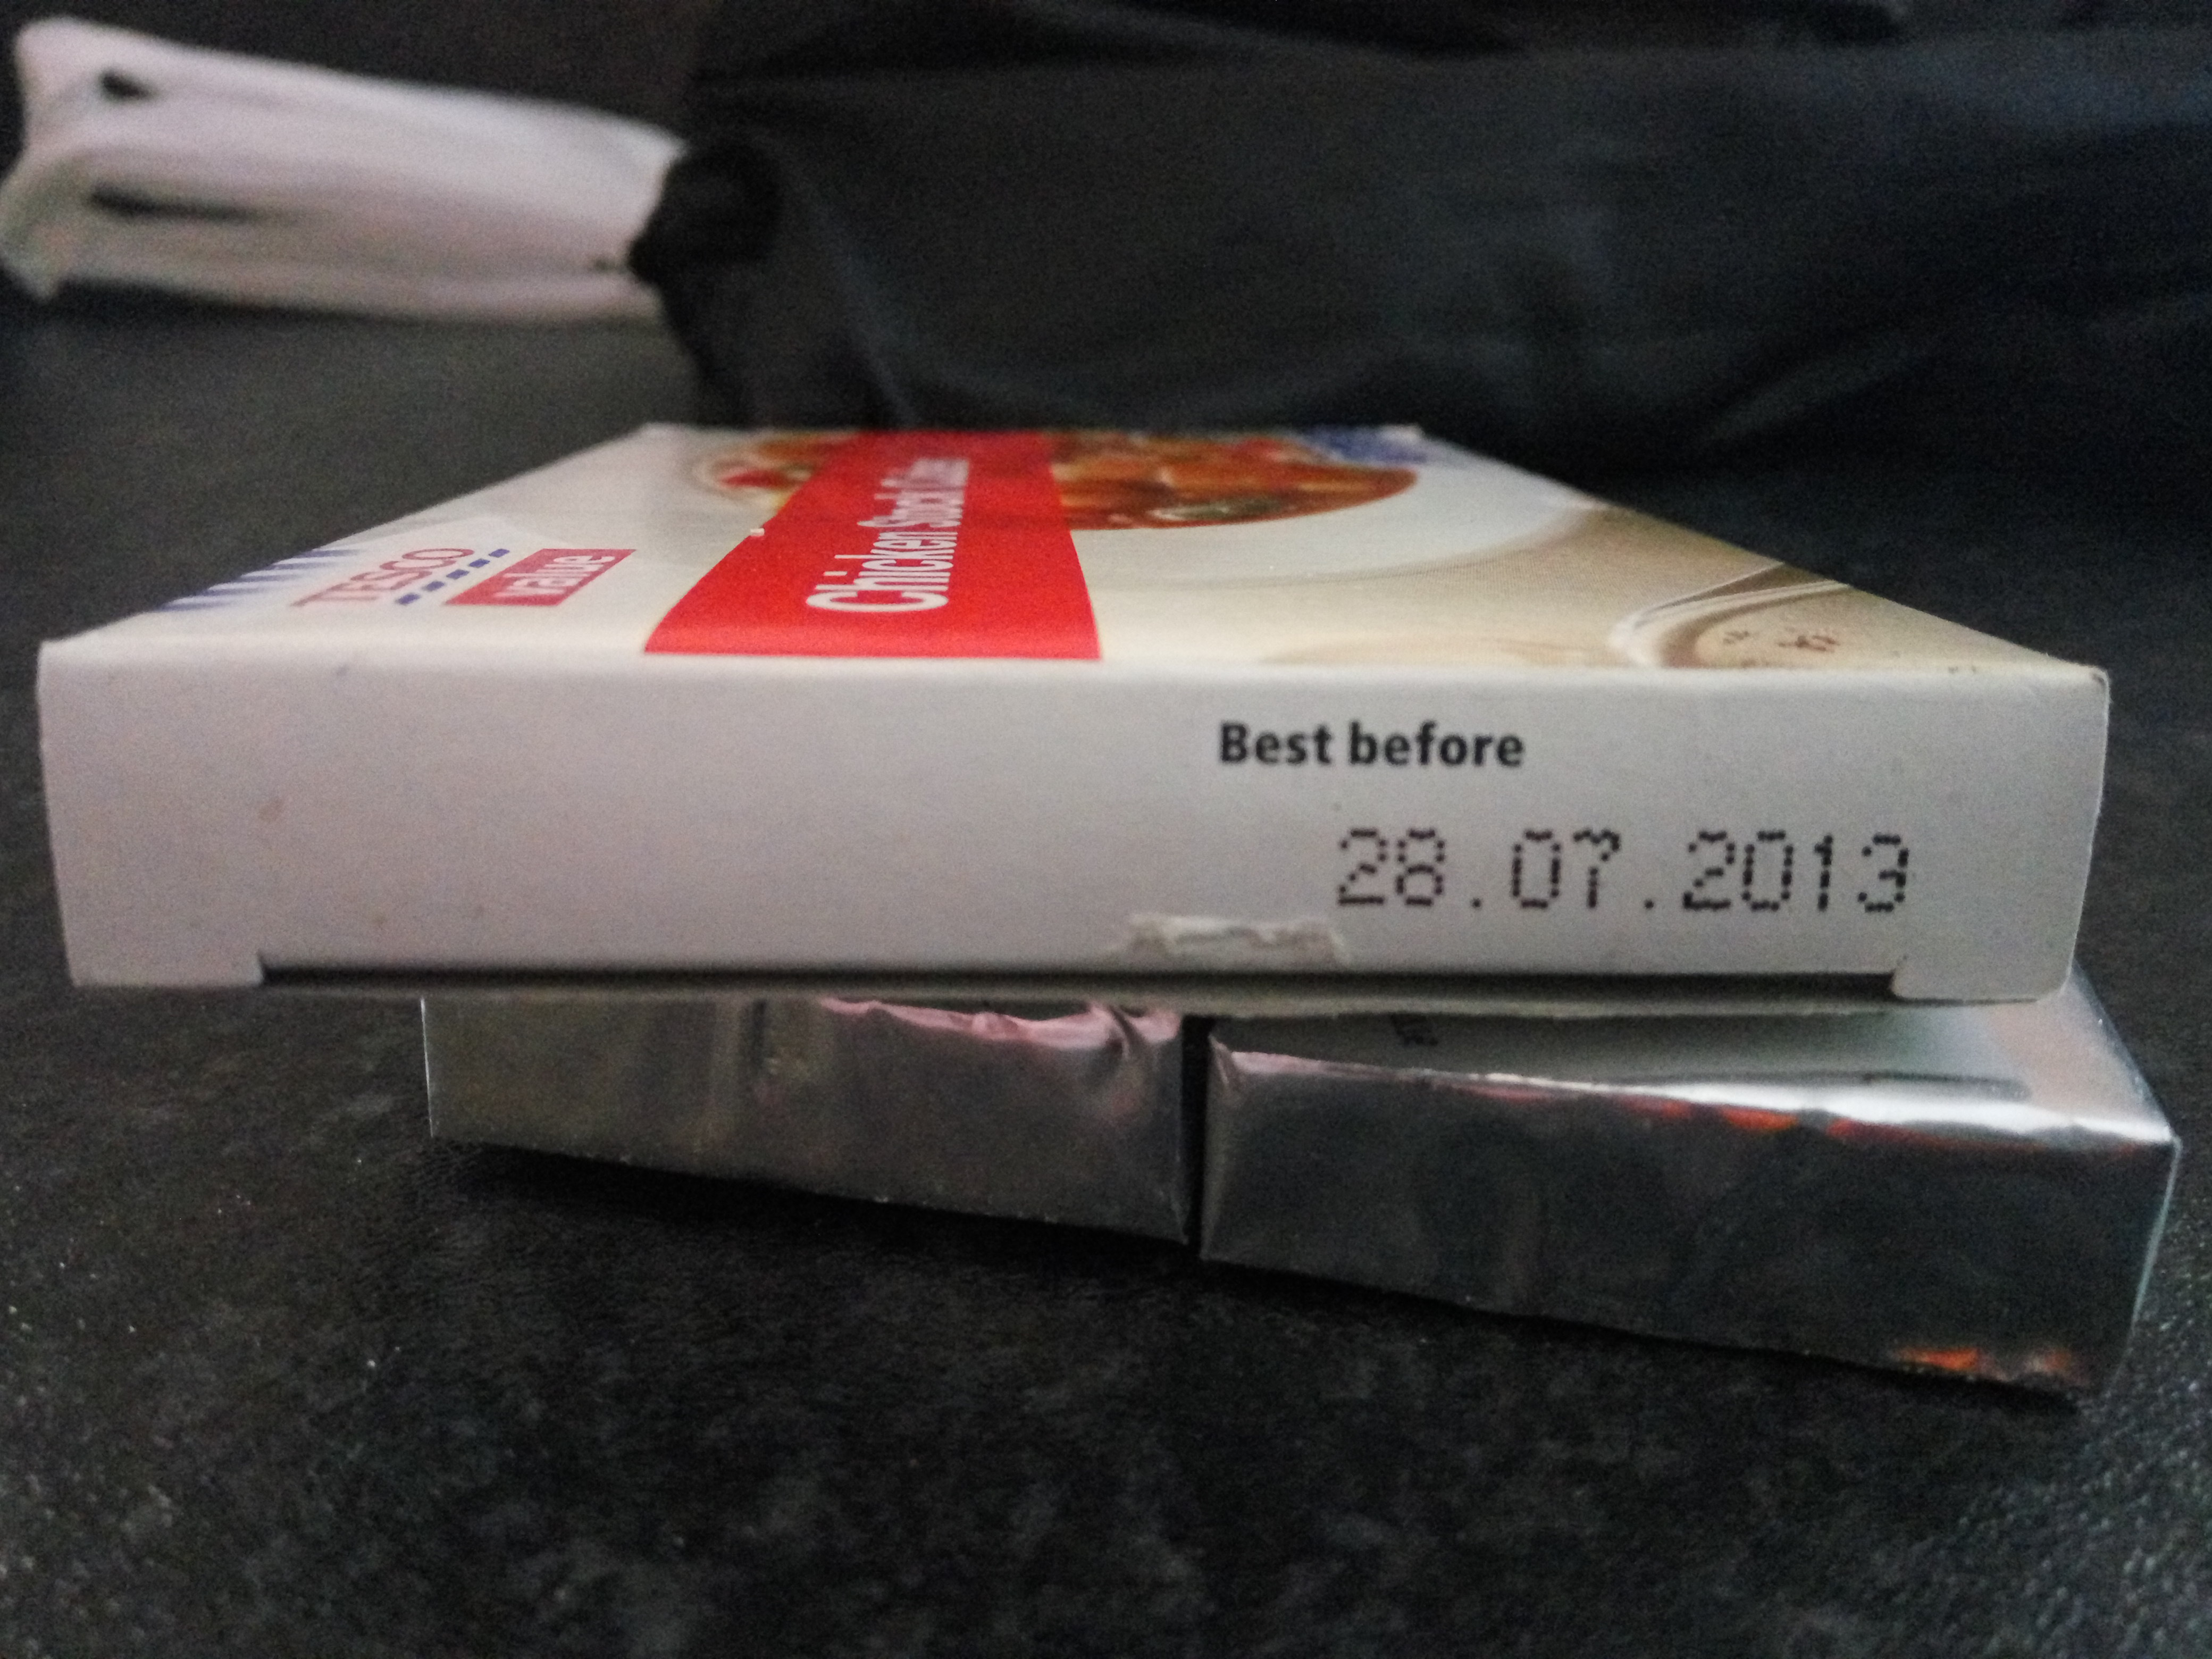 2013 - out of date. Only a bit though